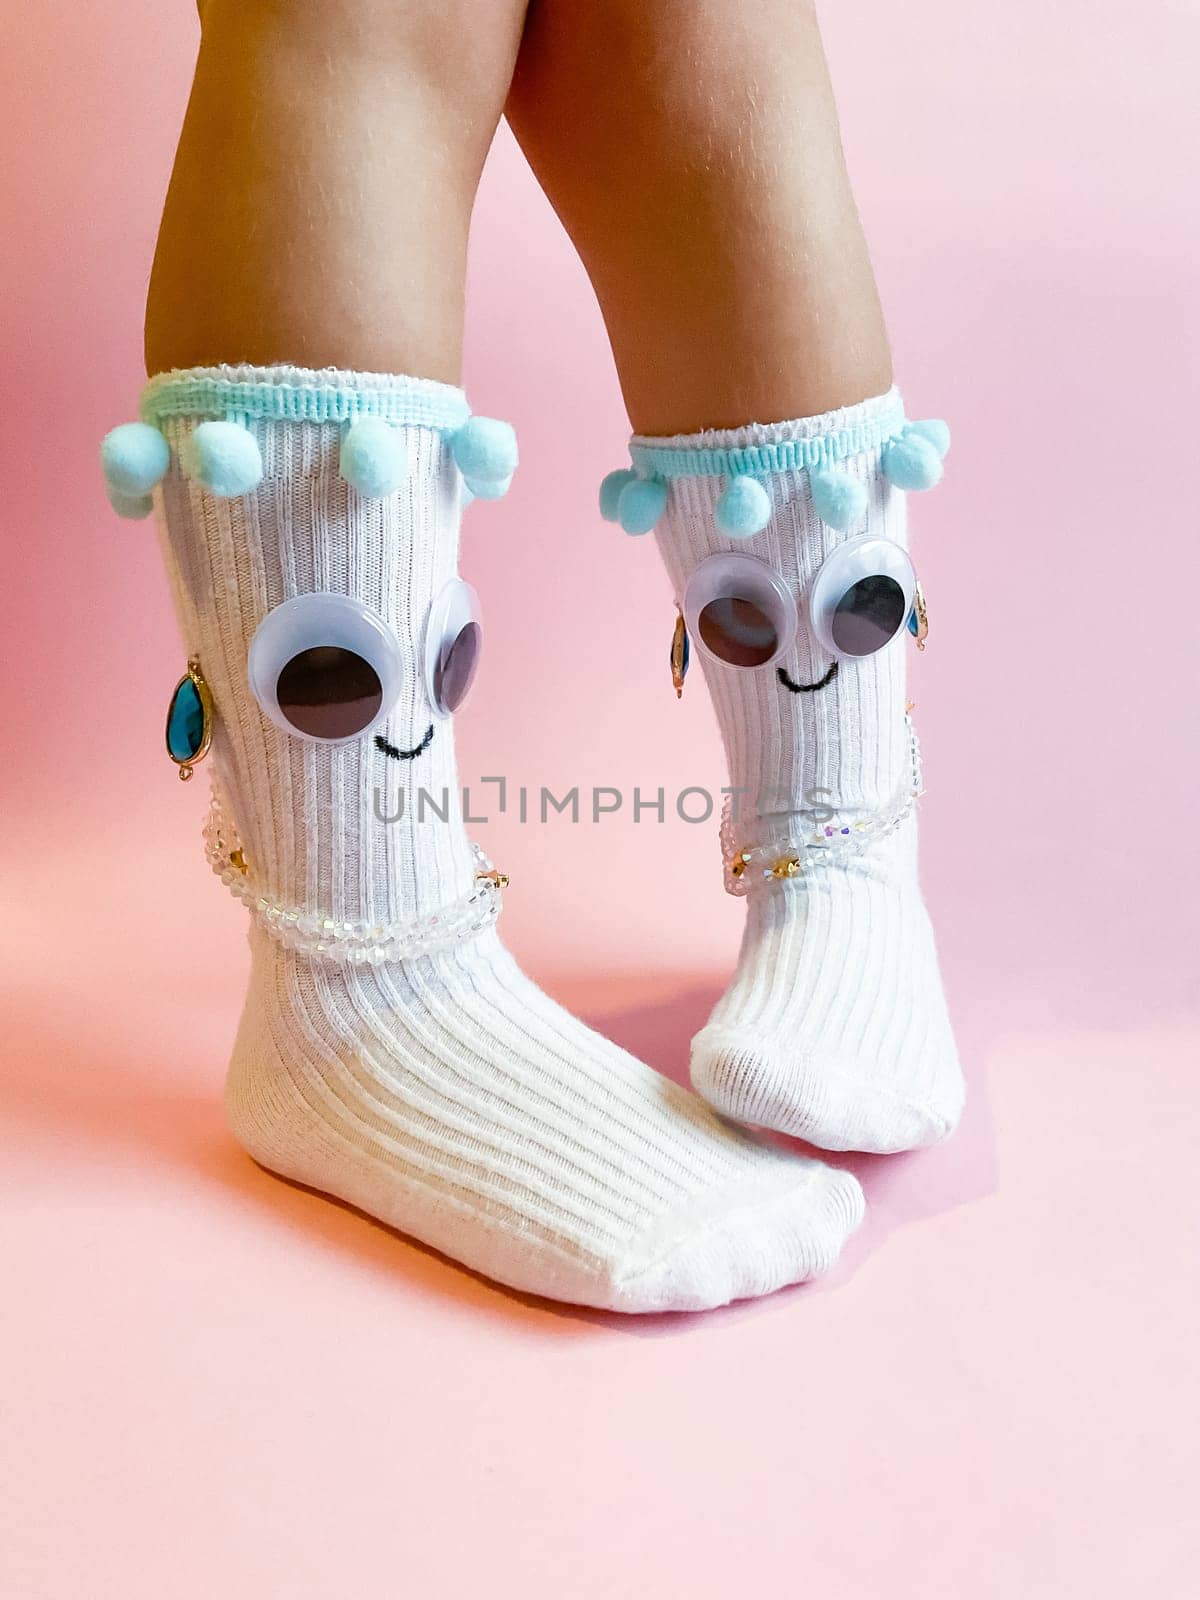 Baby socks with eyes and smile on pink background by Lunnica